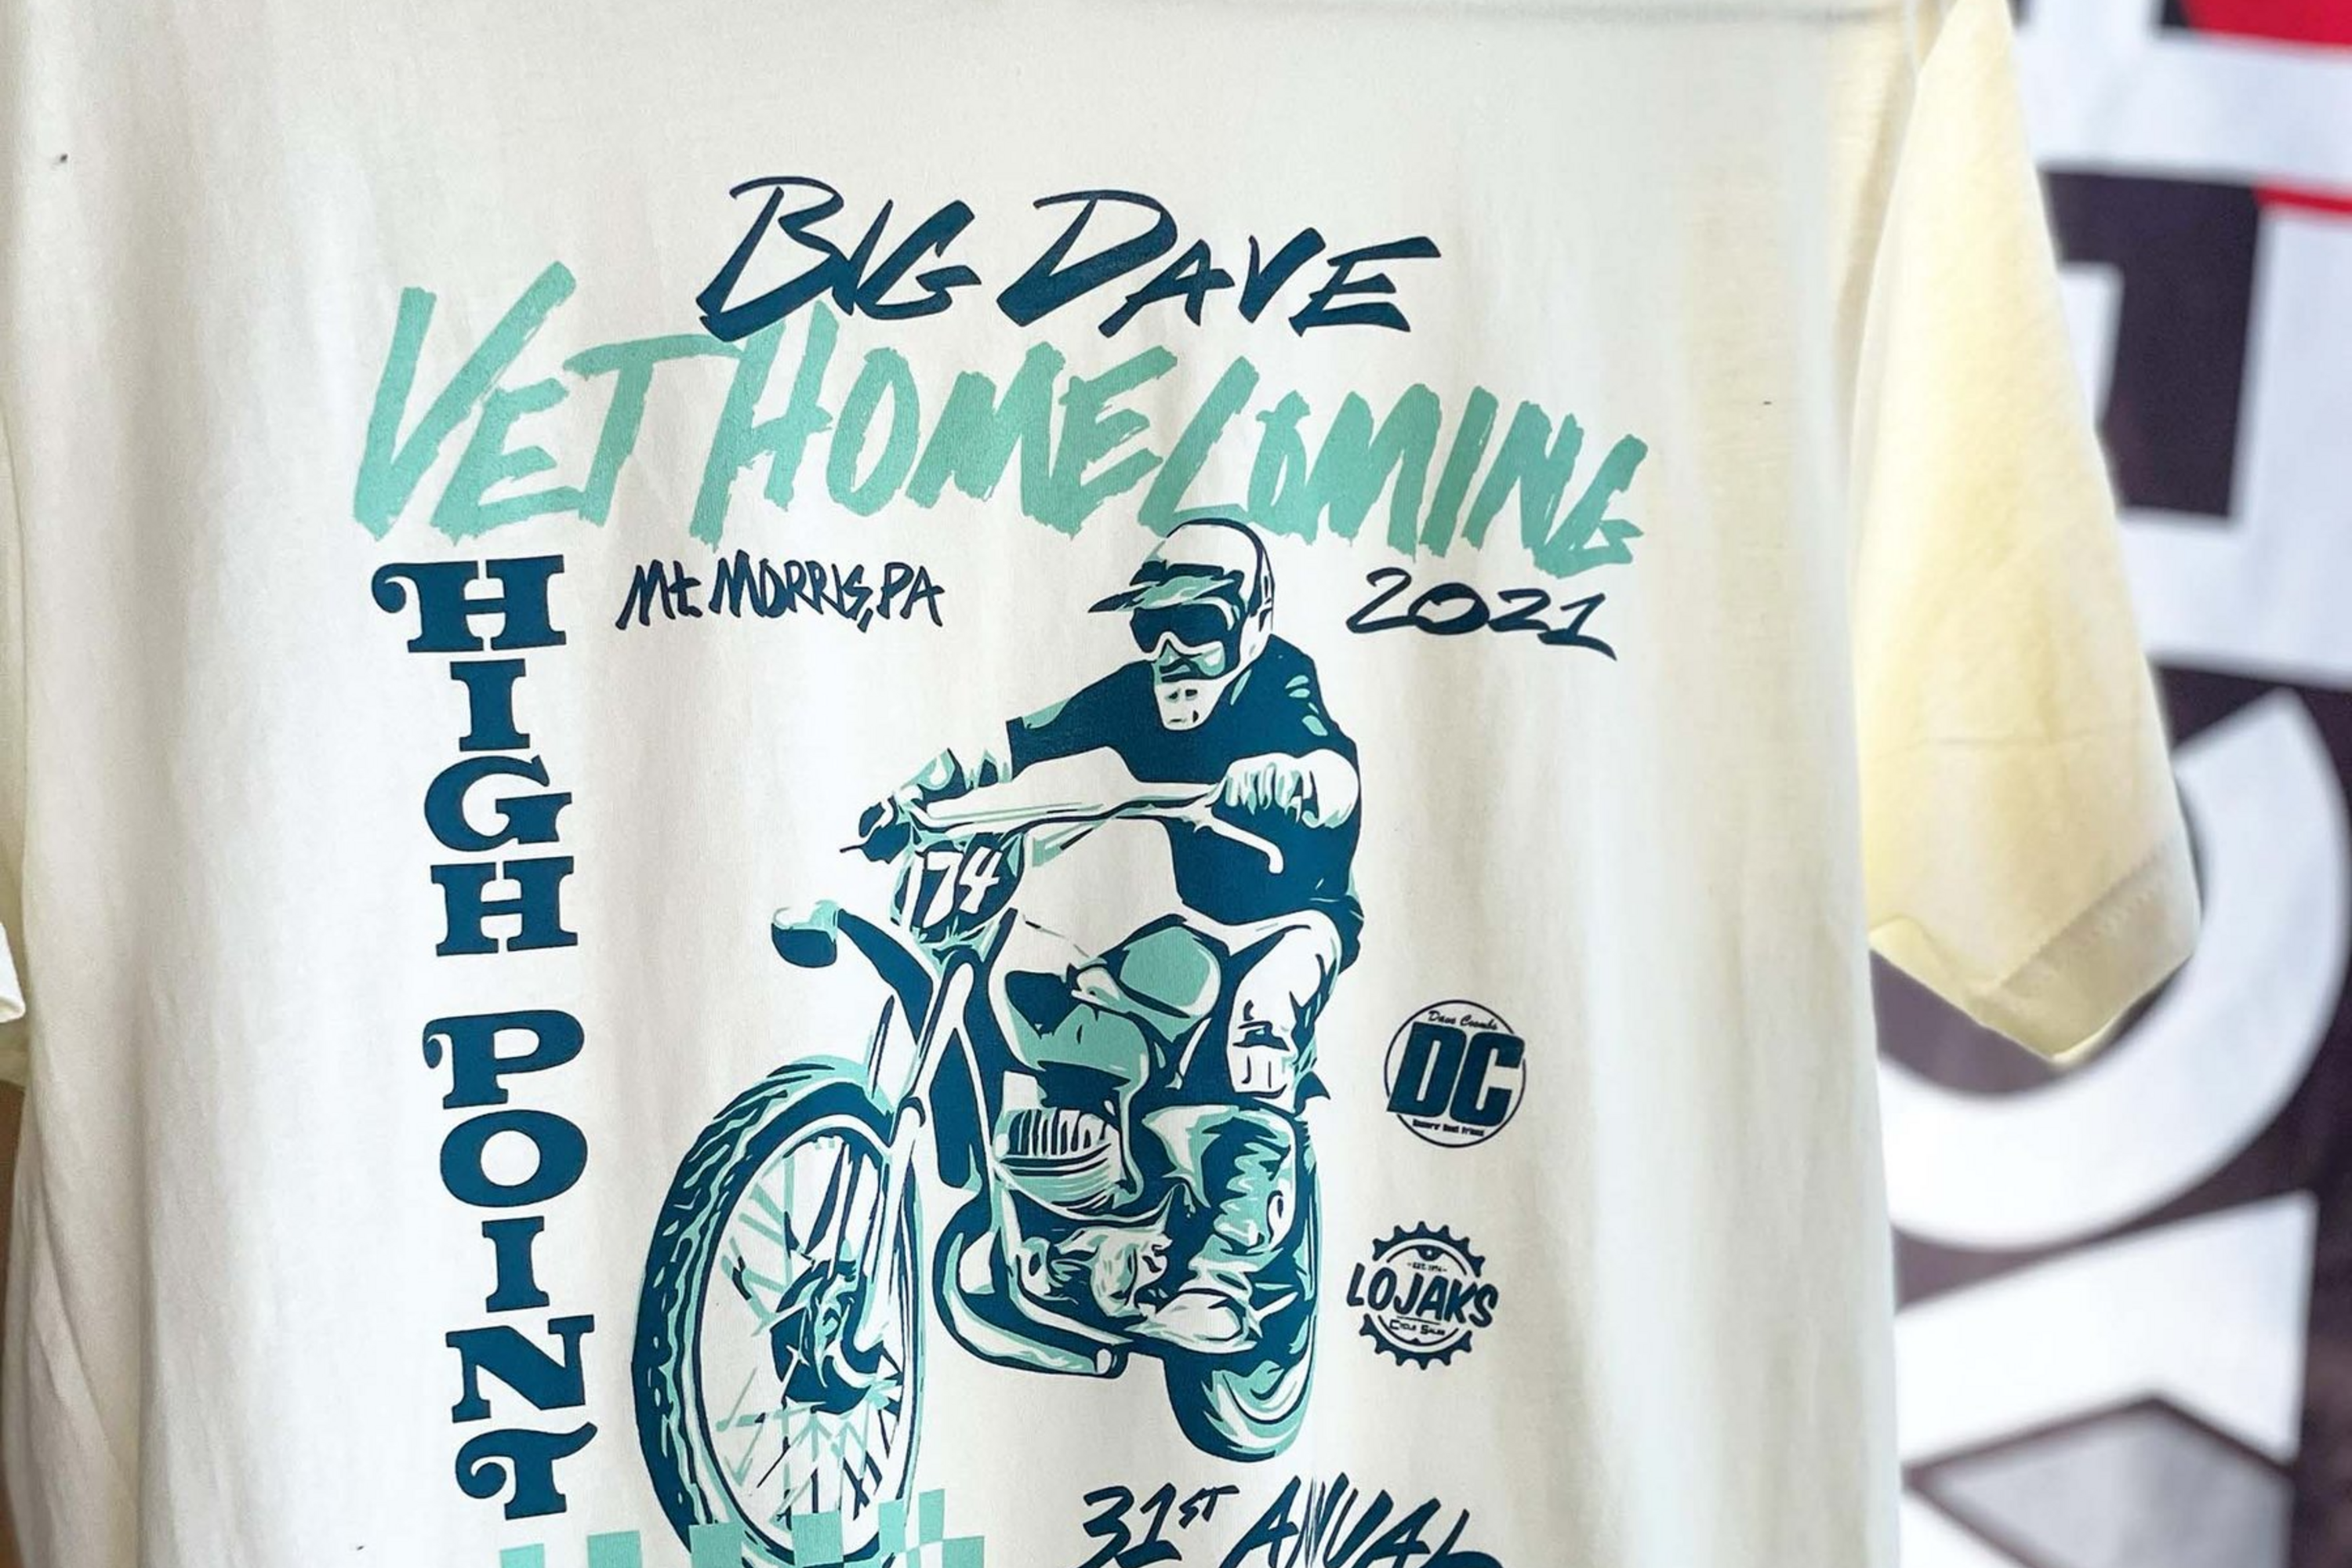 2021 Big Dave Vet Homecoming T-Shirt For Sale Online